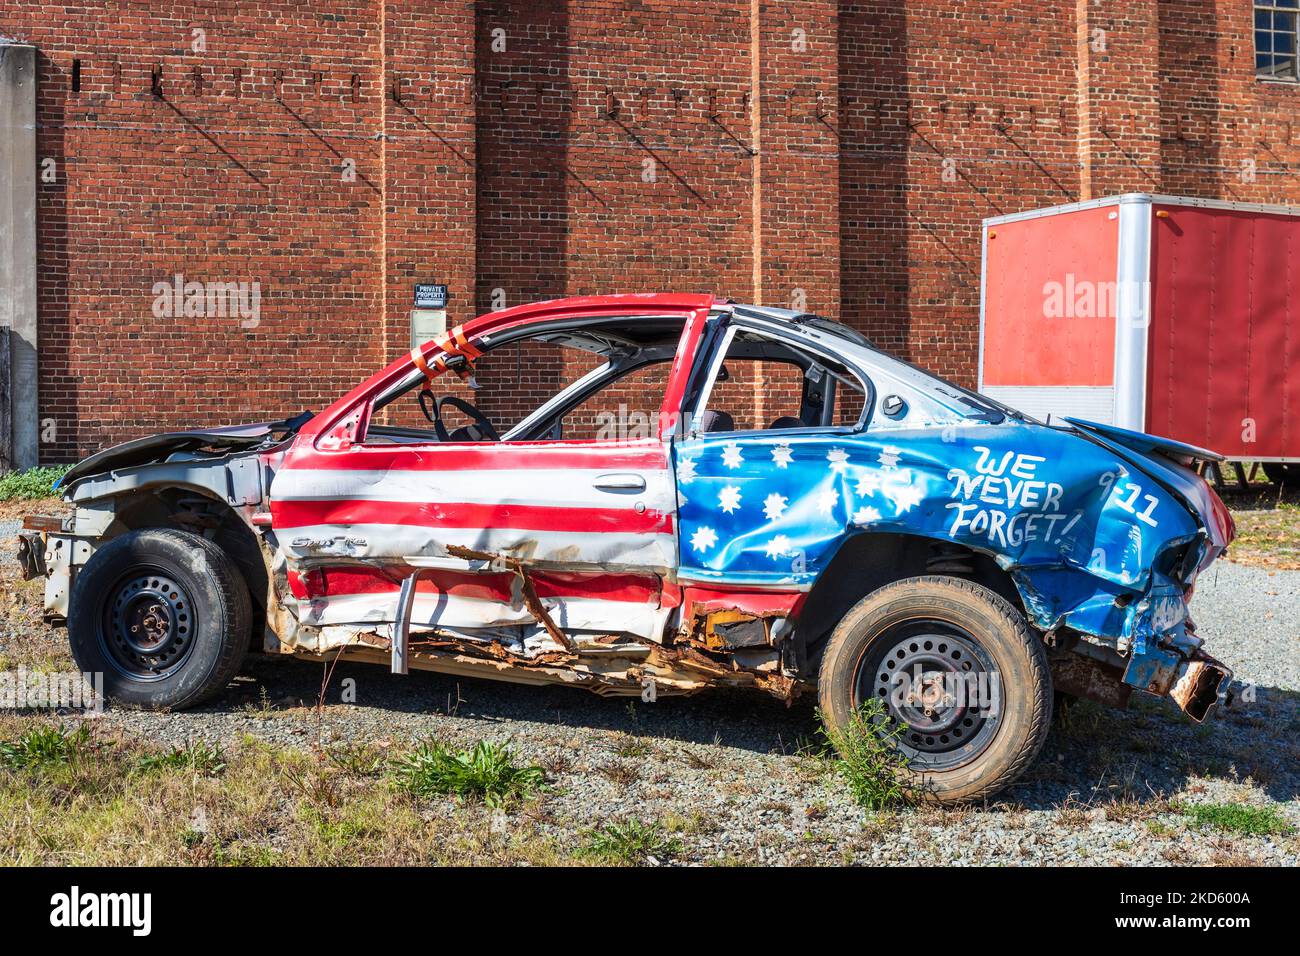 GALAX, VIRGINIA, USA-15 OCTOBER 2022: Compact car painted as American flag, and badly wrecked, with message 'We Never Forget! 9-11' painted on fender. Stock Photo